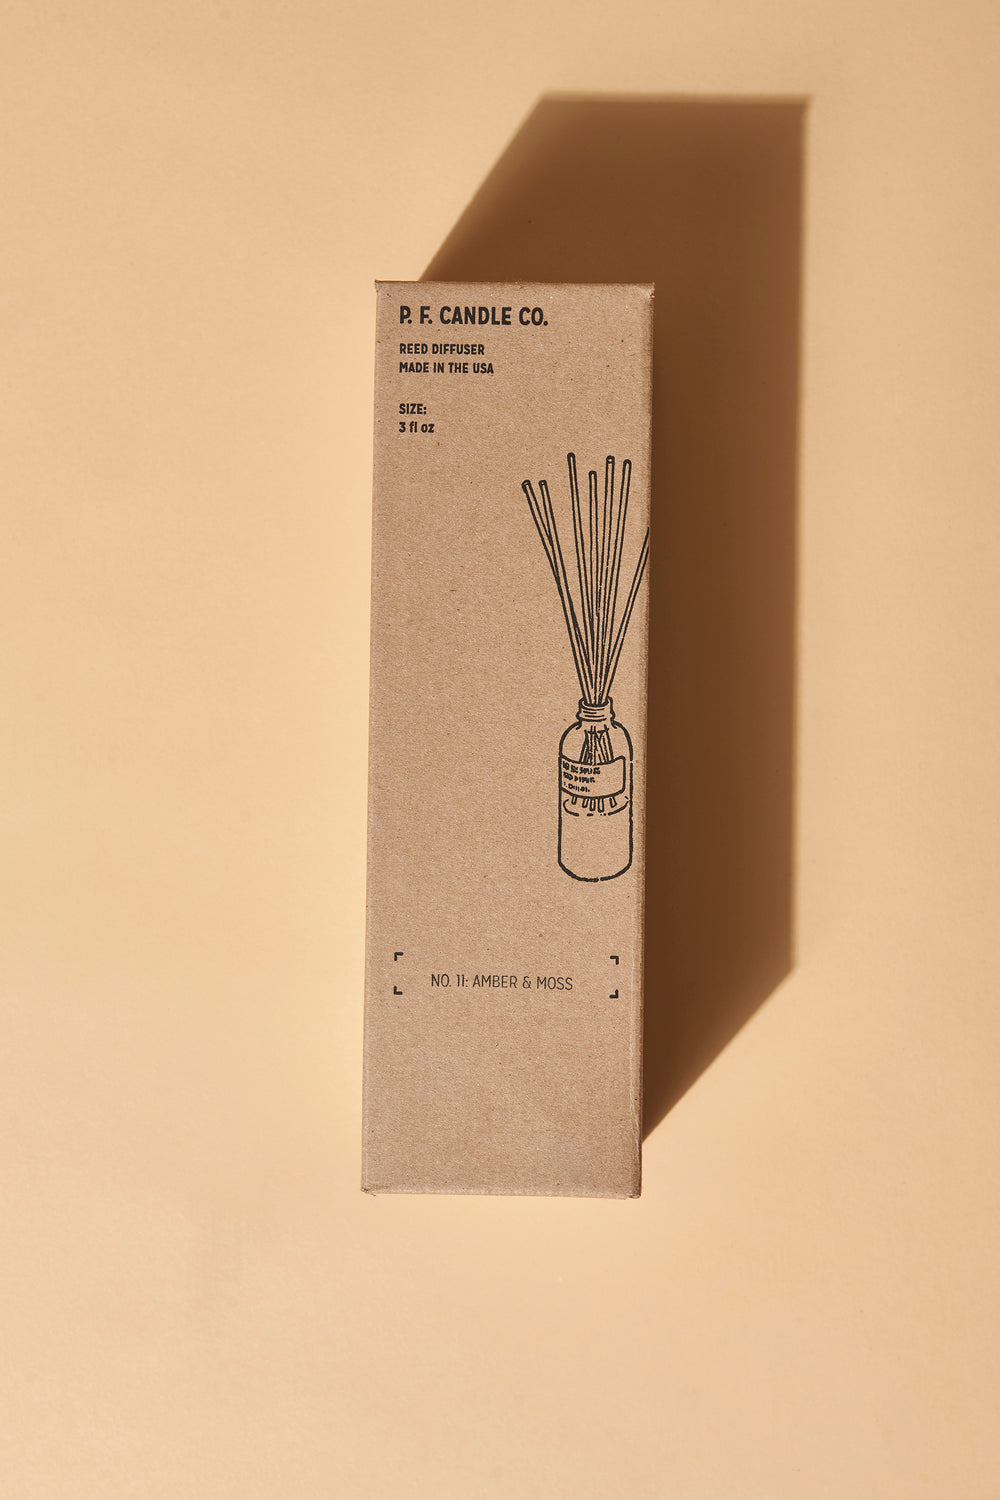 P.F. Candle Co. Diffuser - Whimsy & Row